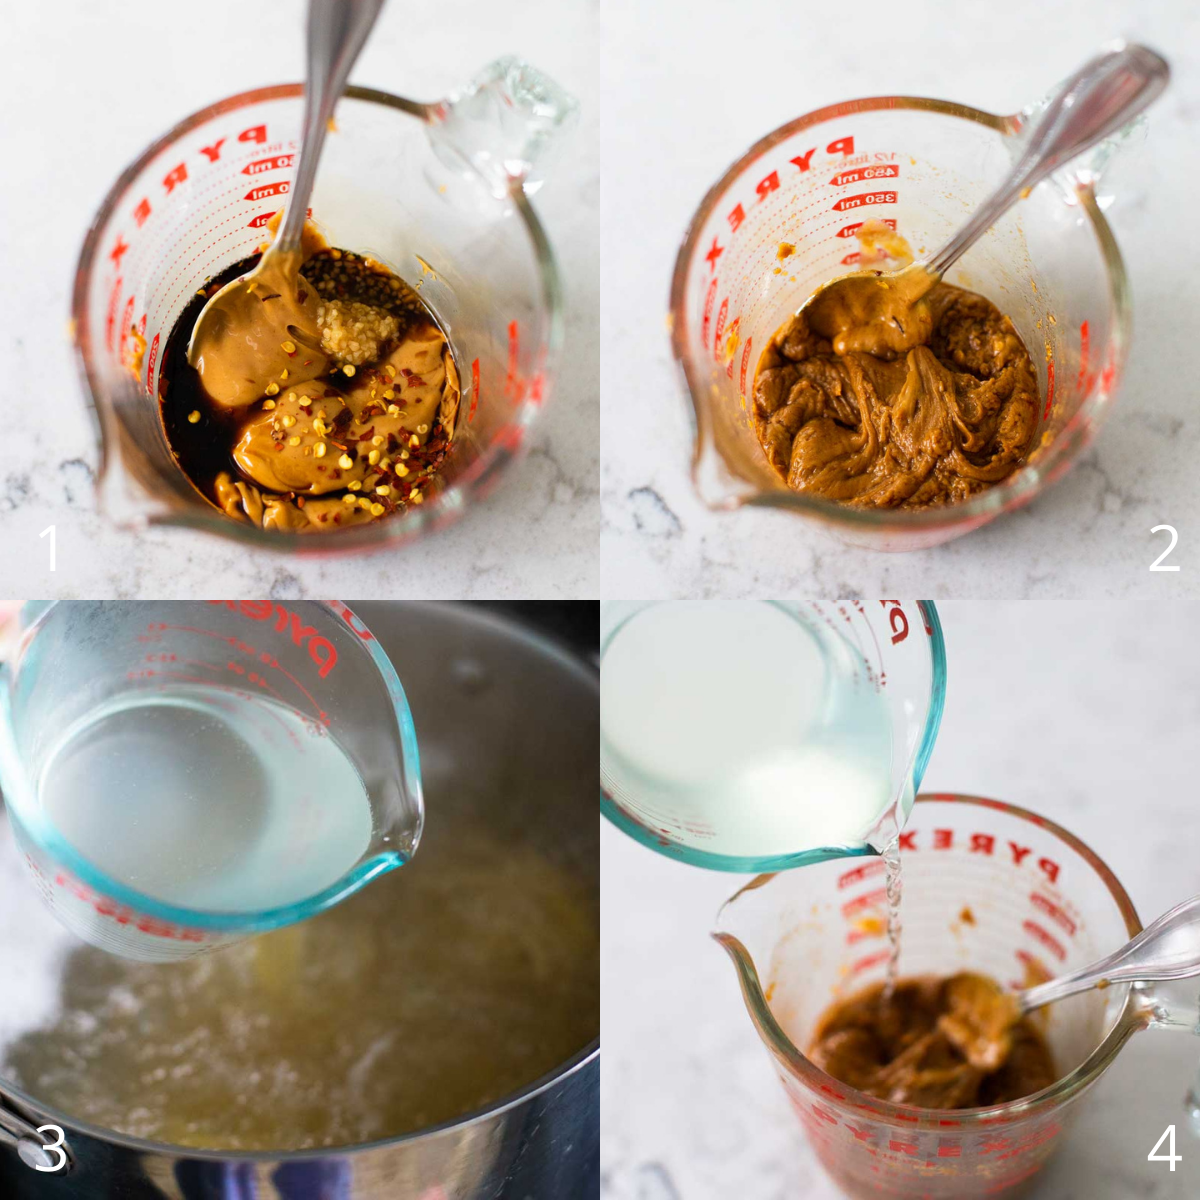 Step by step photos show how to make the peanut butter sauce for noodles.